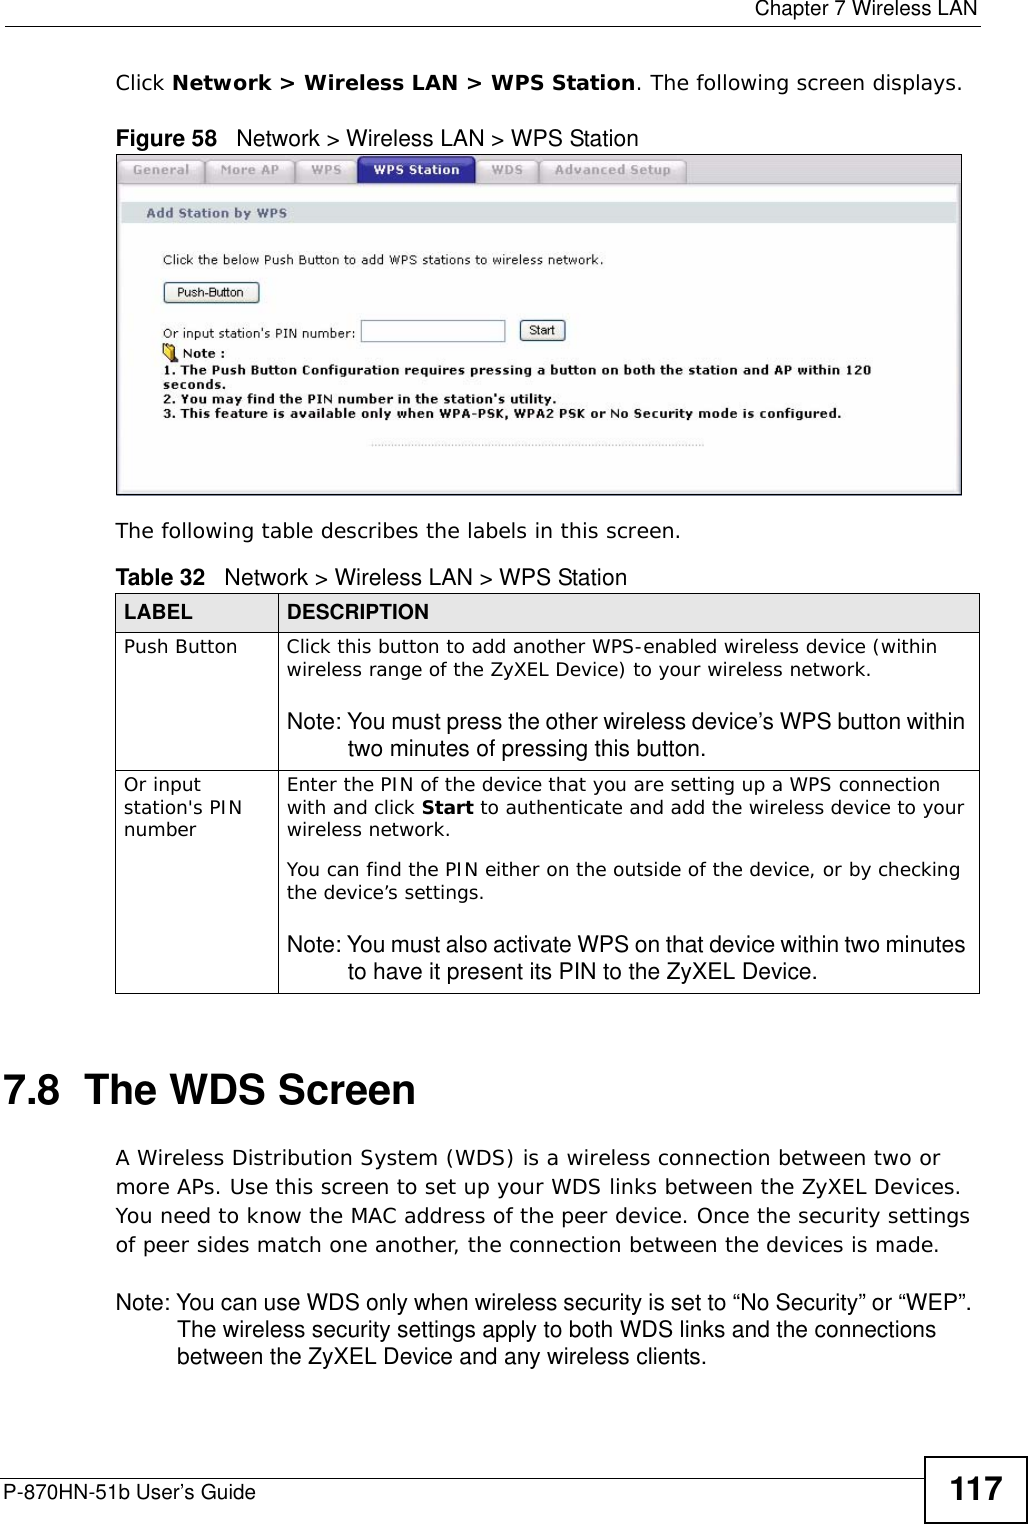  Chapter 7 Wireless LANP-870HN-51b User’s Guide 117Click Network &gt; Wireless LAN &gt; WPS Station. The following screen displays.Figure 58   Network &gt; Wireless LAN &gt; WPS StationThe following table describes the labels in this screen.7.8  The WDS Screen A Wireless Distribution System (WDS) is a wireless connection between two or more APs. Use this screen to set up your WDS links between the ZyXEL Devices. You need to know the MAC address of the peer device. Once the security settings of peer sides match one another, the connection between the devices is made. Note: You can use WDS only when wireless security is set to “No Security” or “WEP”. The wireless security settings apply to both WDS links and the connections between the ZyXEL Device and any wireless clients.Table 32   Network &gt; Wireless LAN &gt; WPS StationLABEL DESCRIPTIONPush Button Click this button to add another WPS-enabled wireless device (within wireless range of the ZyXEL Device) to your wireless network.Note: You must press the other wireless device’s WPS button within two minutes of pressing this button.Or input station&apos;s PIN numberEnter the PIN of the device that you are setting up a WPS connection with and click Start to authenticate and add the wireless device to your wireless network.You can find the PIN either on the outside of the device, or by checking the device’s settings.Note: You must also activate WPS on that device within two minutes to have it present its PIN to the ZyXEL Device.